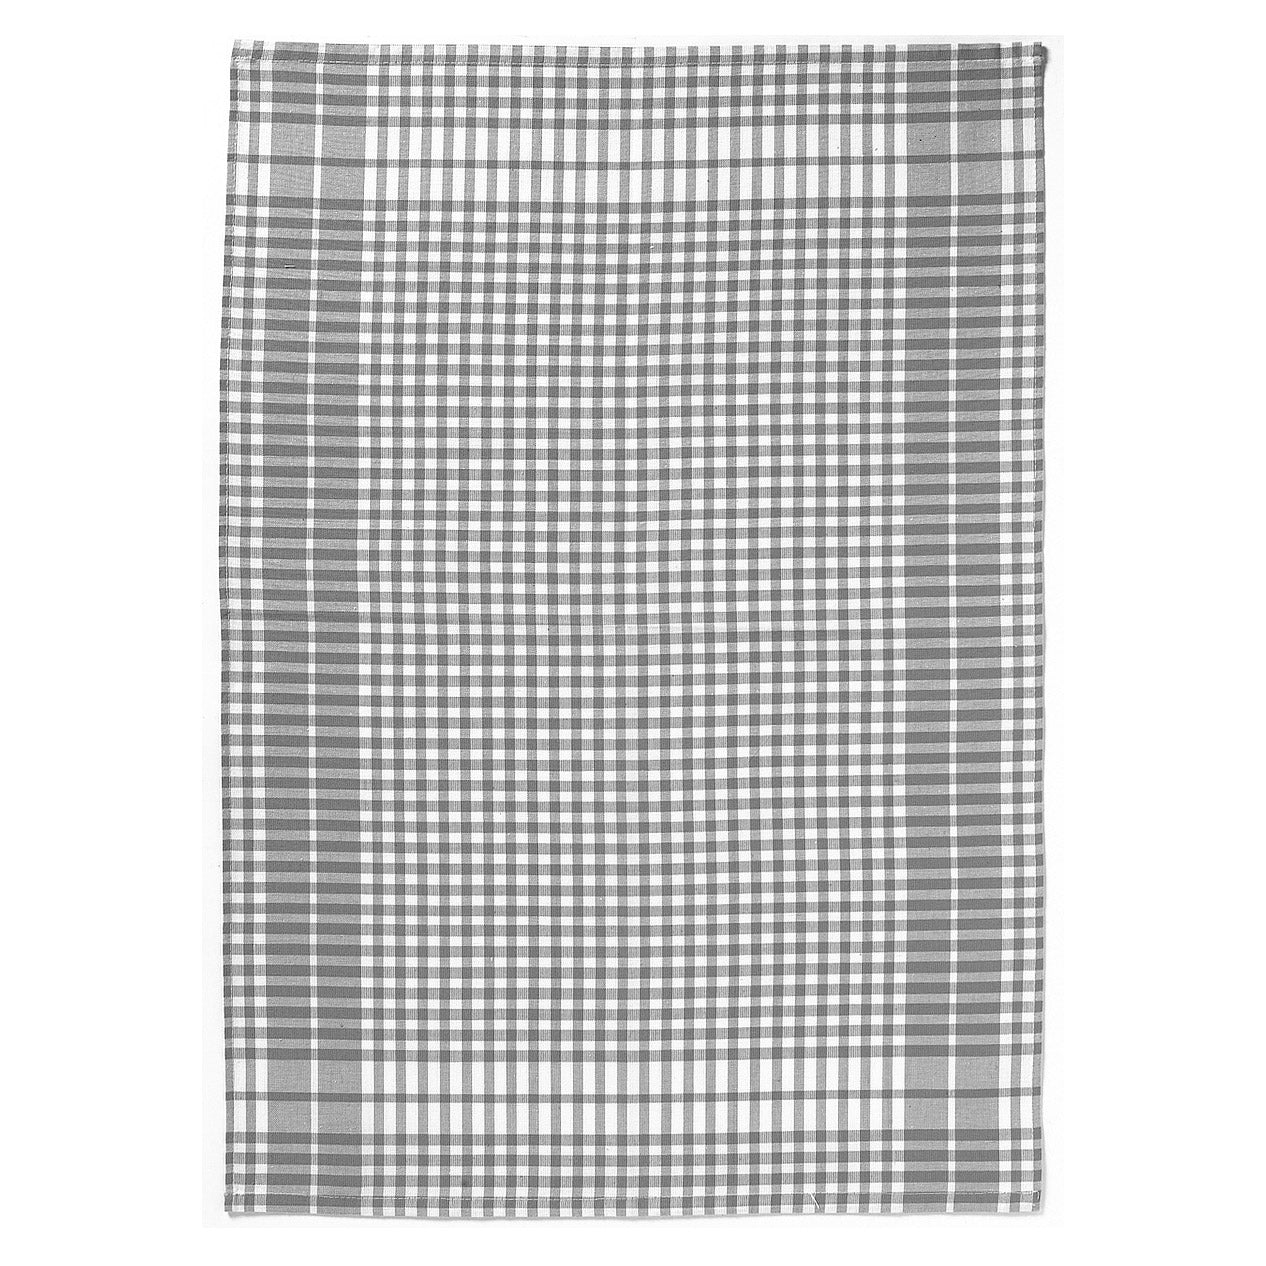 https://cdn.shopify.com/s/files/1/0798/7579/products/winkler-kitchen-tea-towel-french-cotton-small-square-petits-carreaux-gray_1600x.jpg?v=1617054187